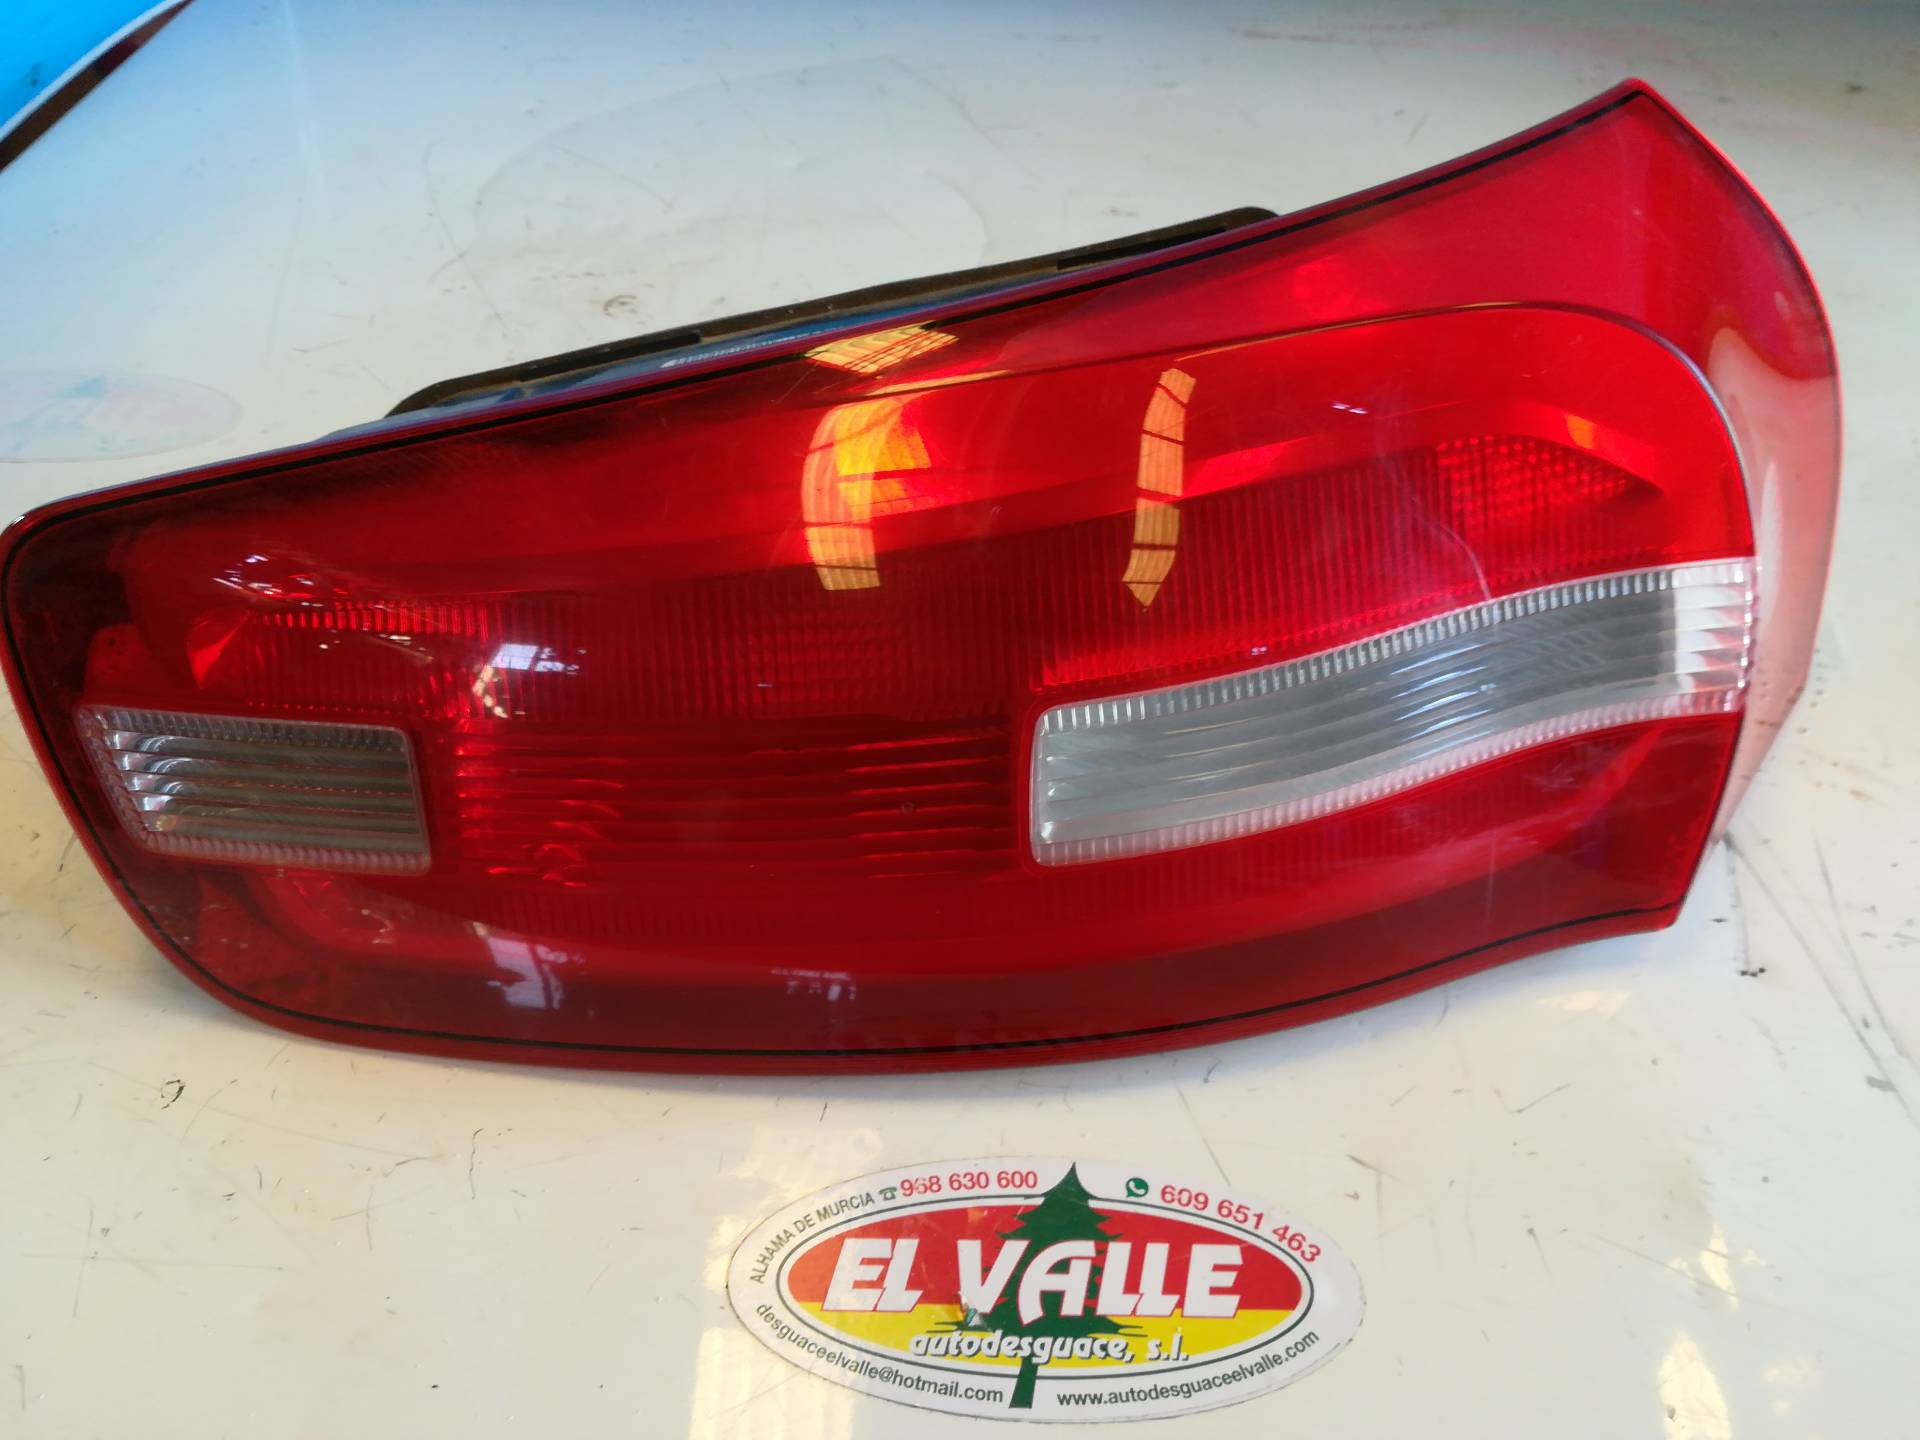 CITROËN C4 Picasso 2 generation (2013-2018) Rear Right Taillight Lamp 24958788